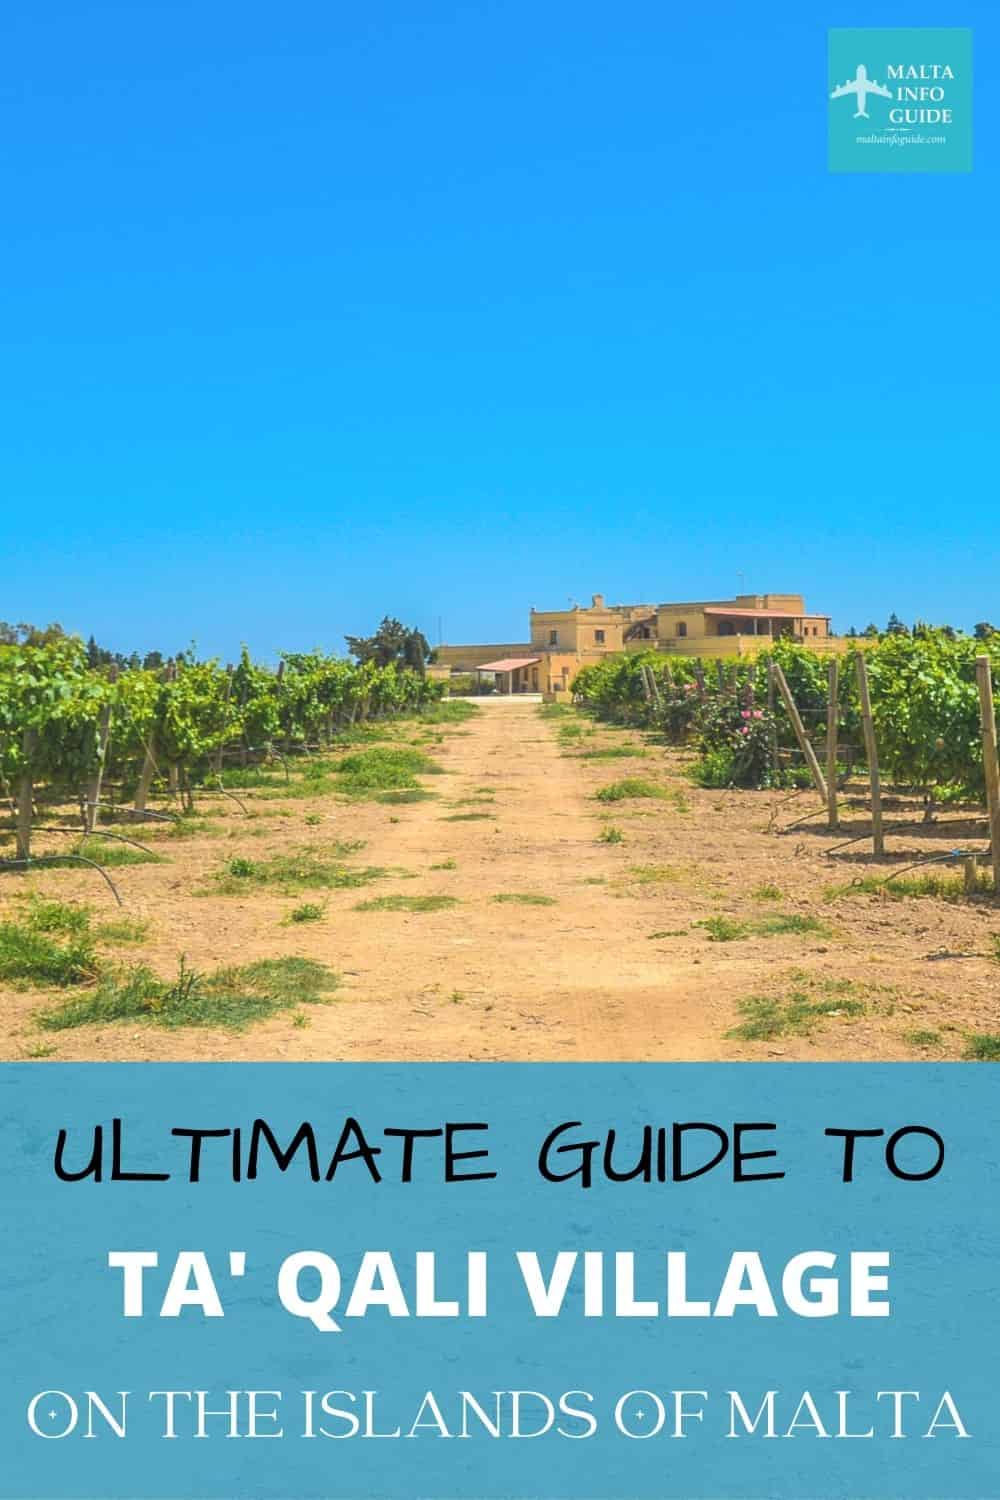 Visit the village of Ta' Qali very close to Rabat and Mdina Malta. Here is a guide that will help your visit.